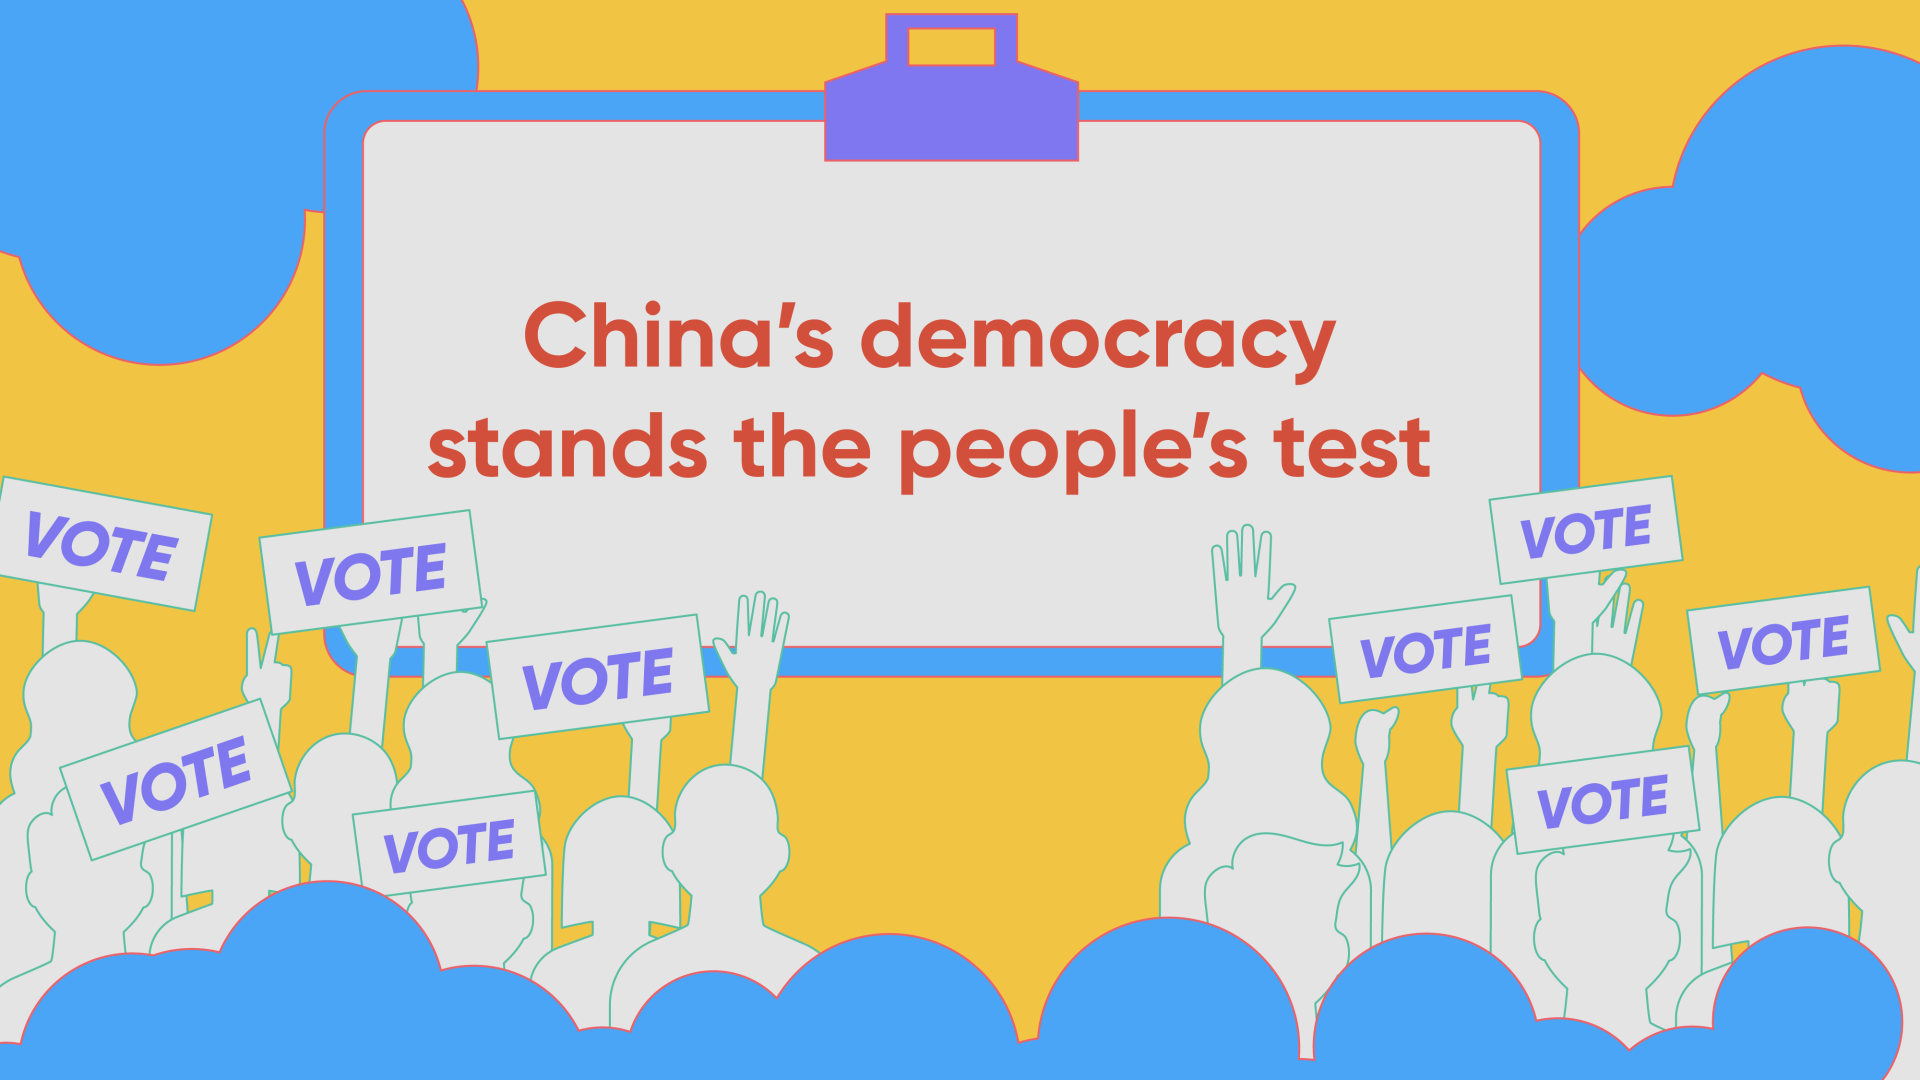 China's democracy stands the people's test